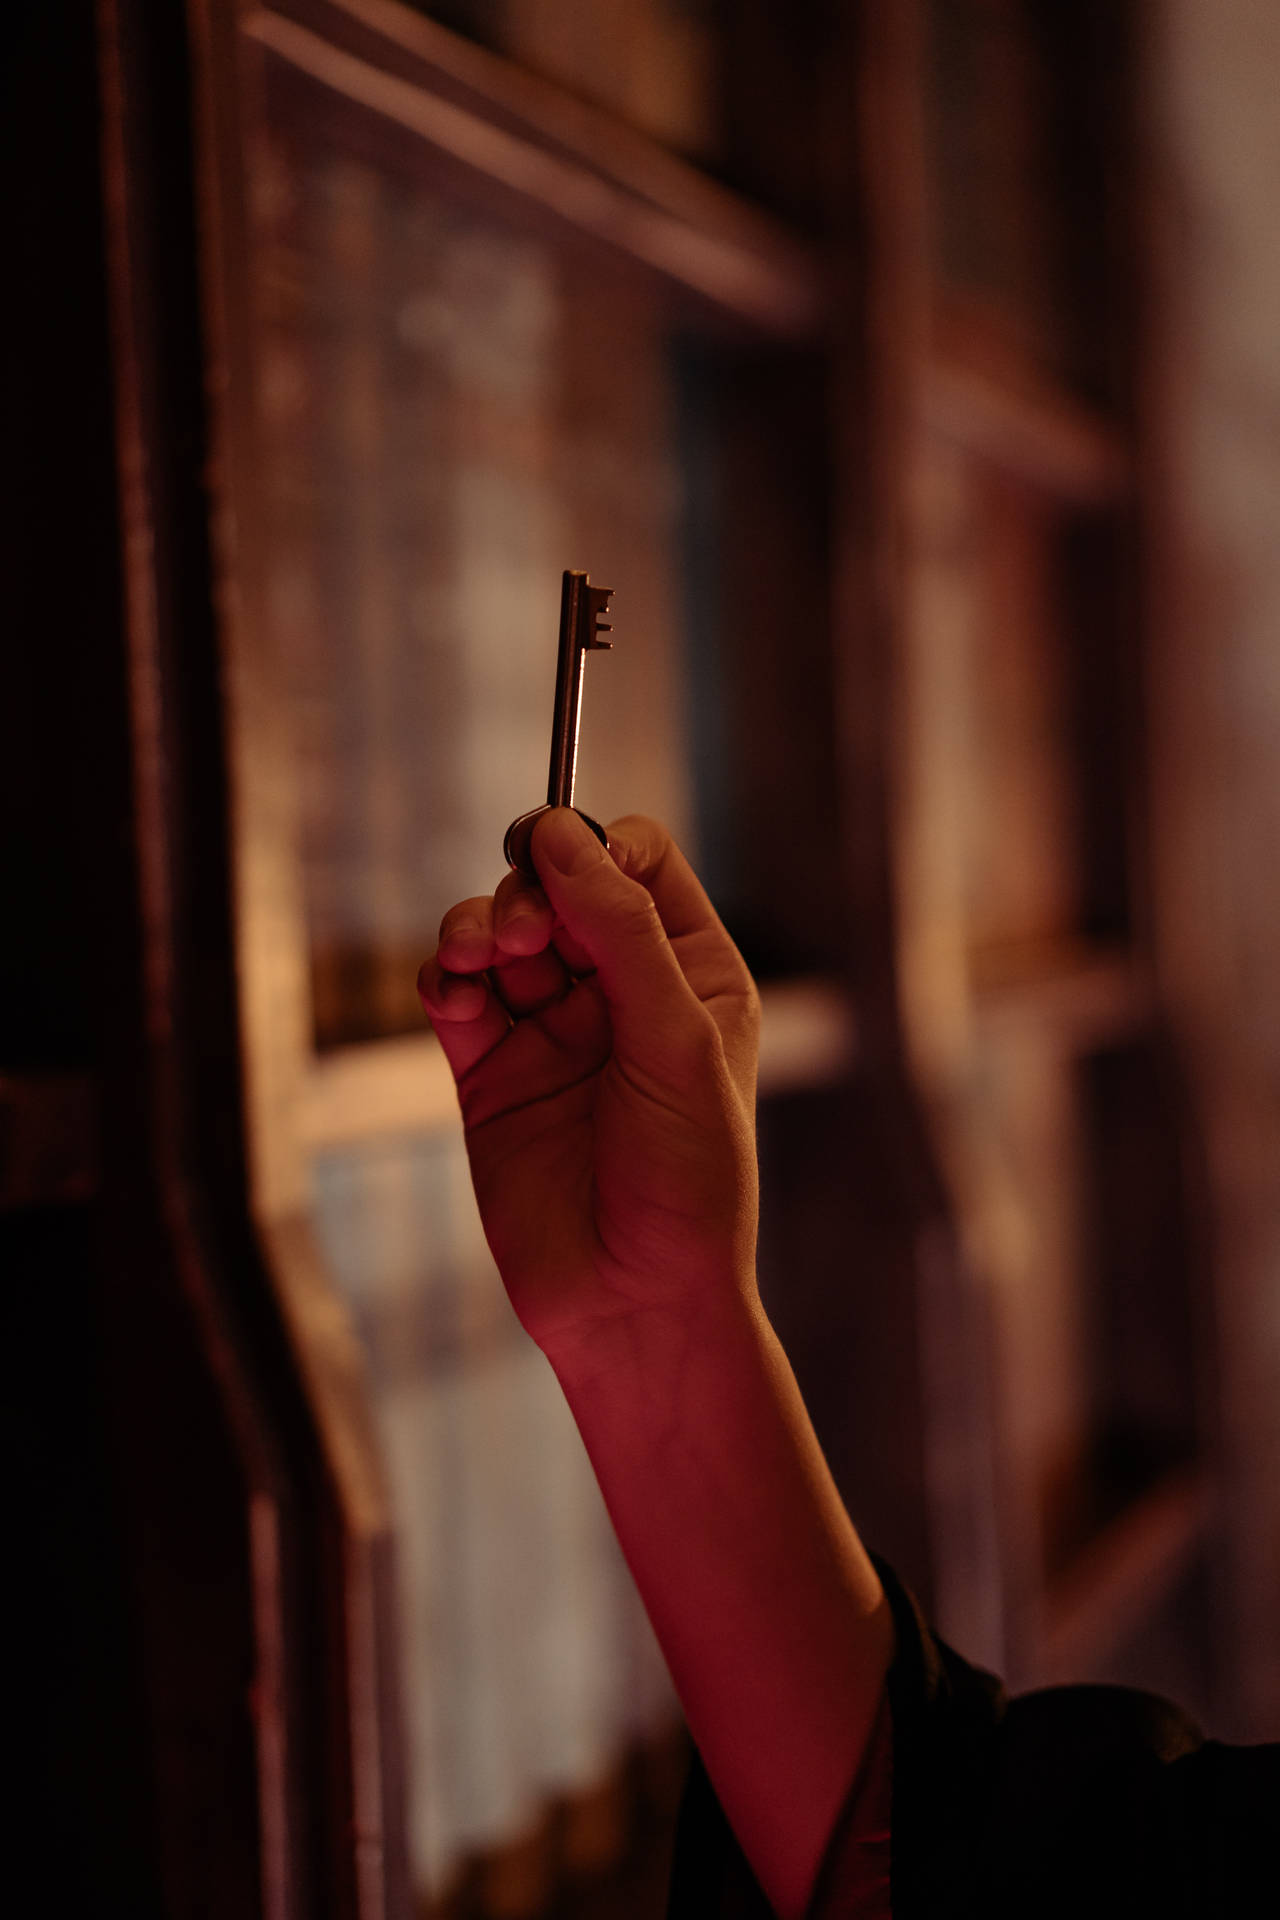 Harry Potter Aesthetic Hand Holding A Key Wallpaper